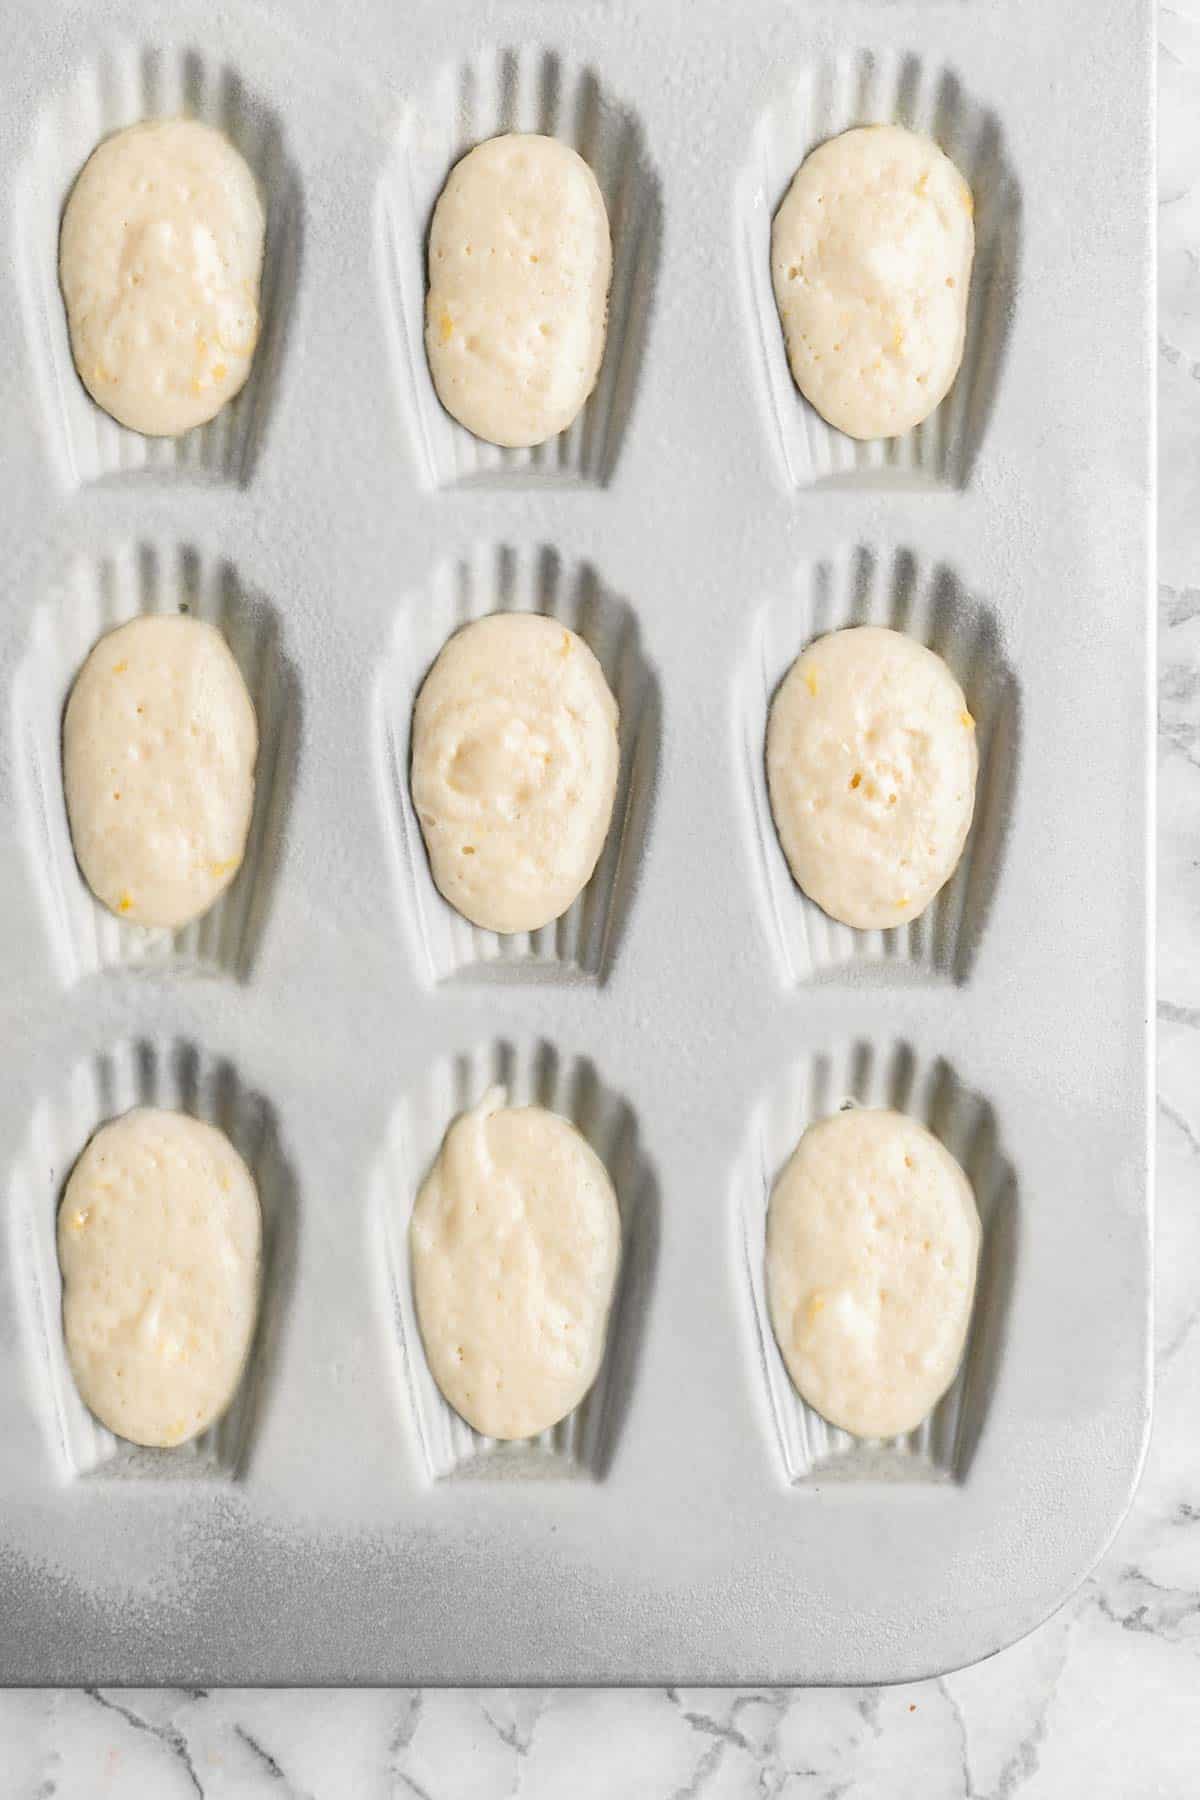 Classic Madeleines are soft spongy mini cakes with a signature shell shape and dusting of sugar on top. Making French butter cakes is easier than you think! | aheadofthyme.com